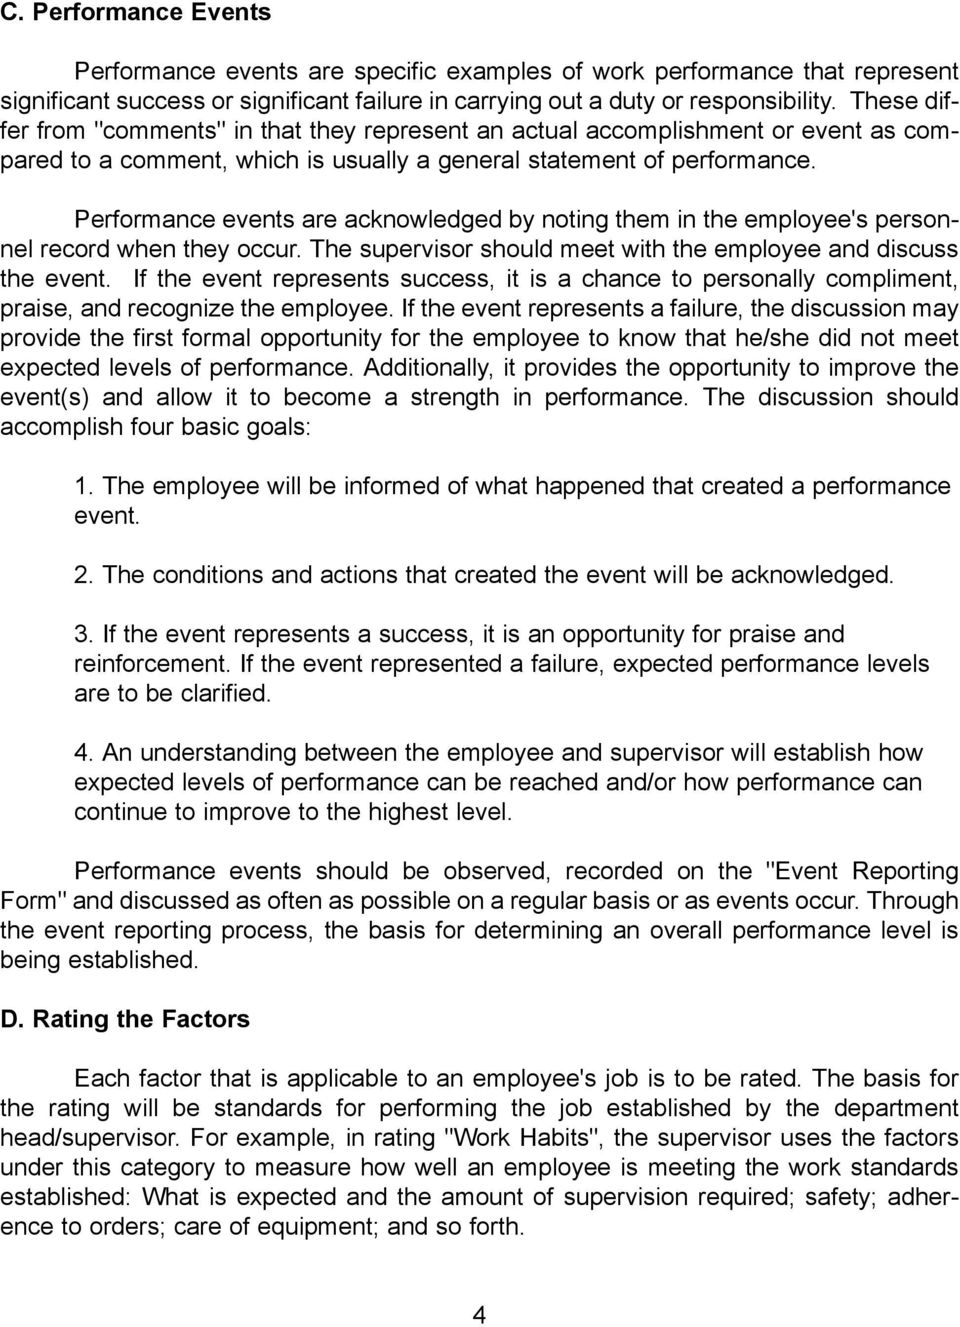 Performance events are acknowledged by noting them in the employee's personnel record when they occur. The supervisor should meet with the employee and discuss the event.